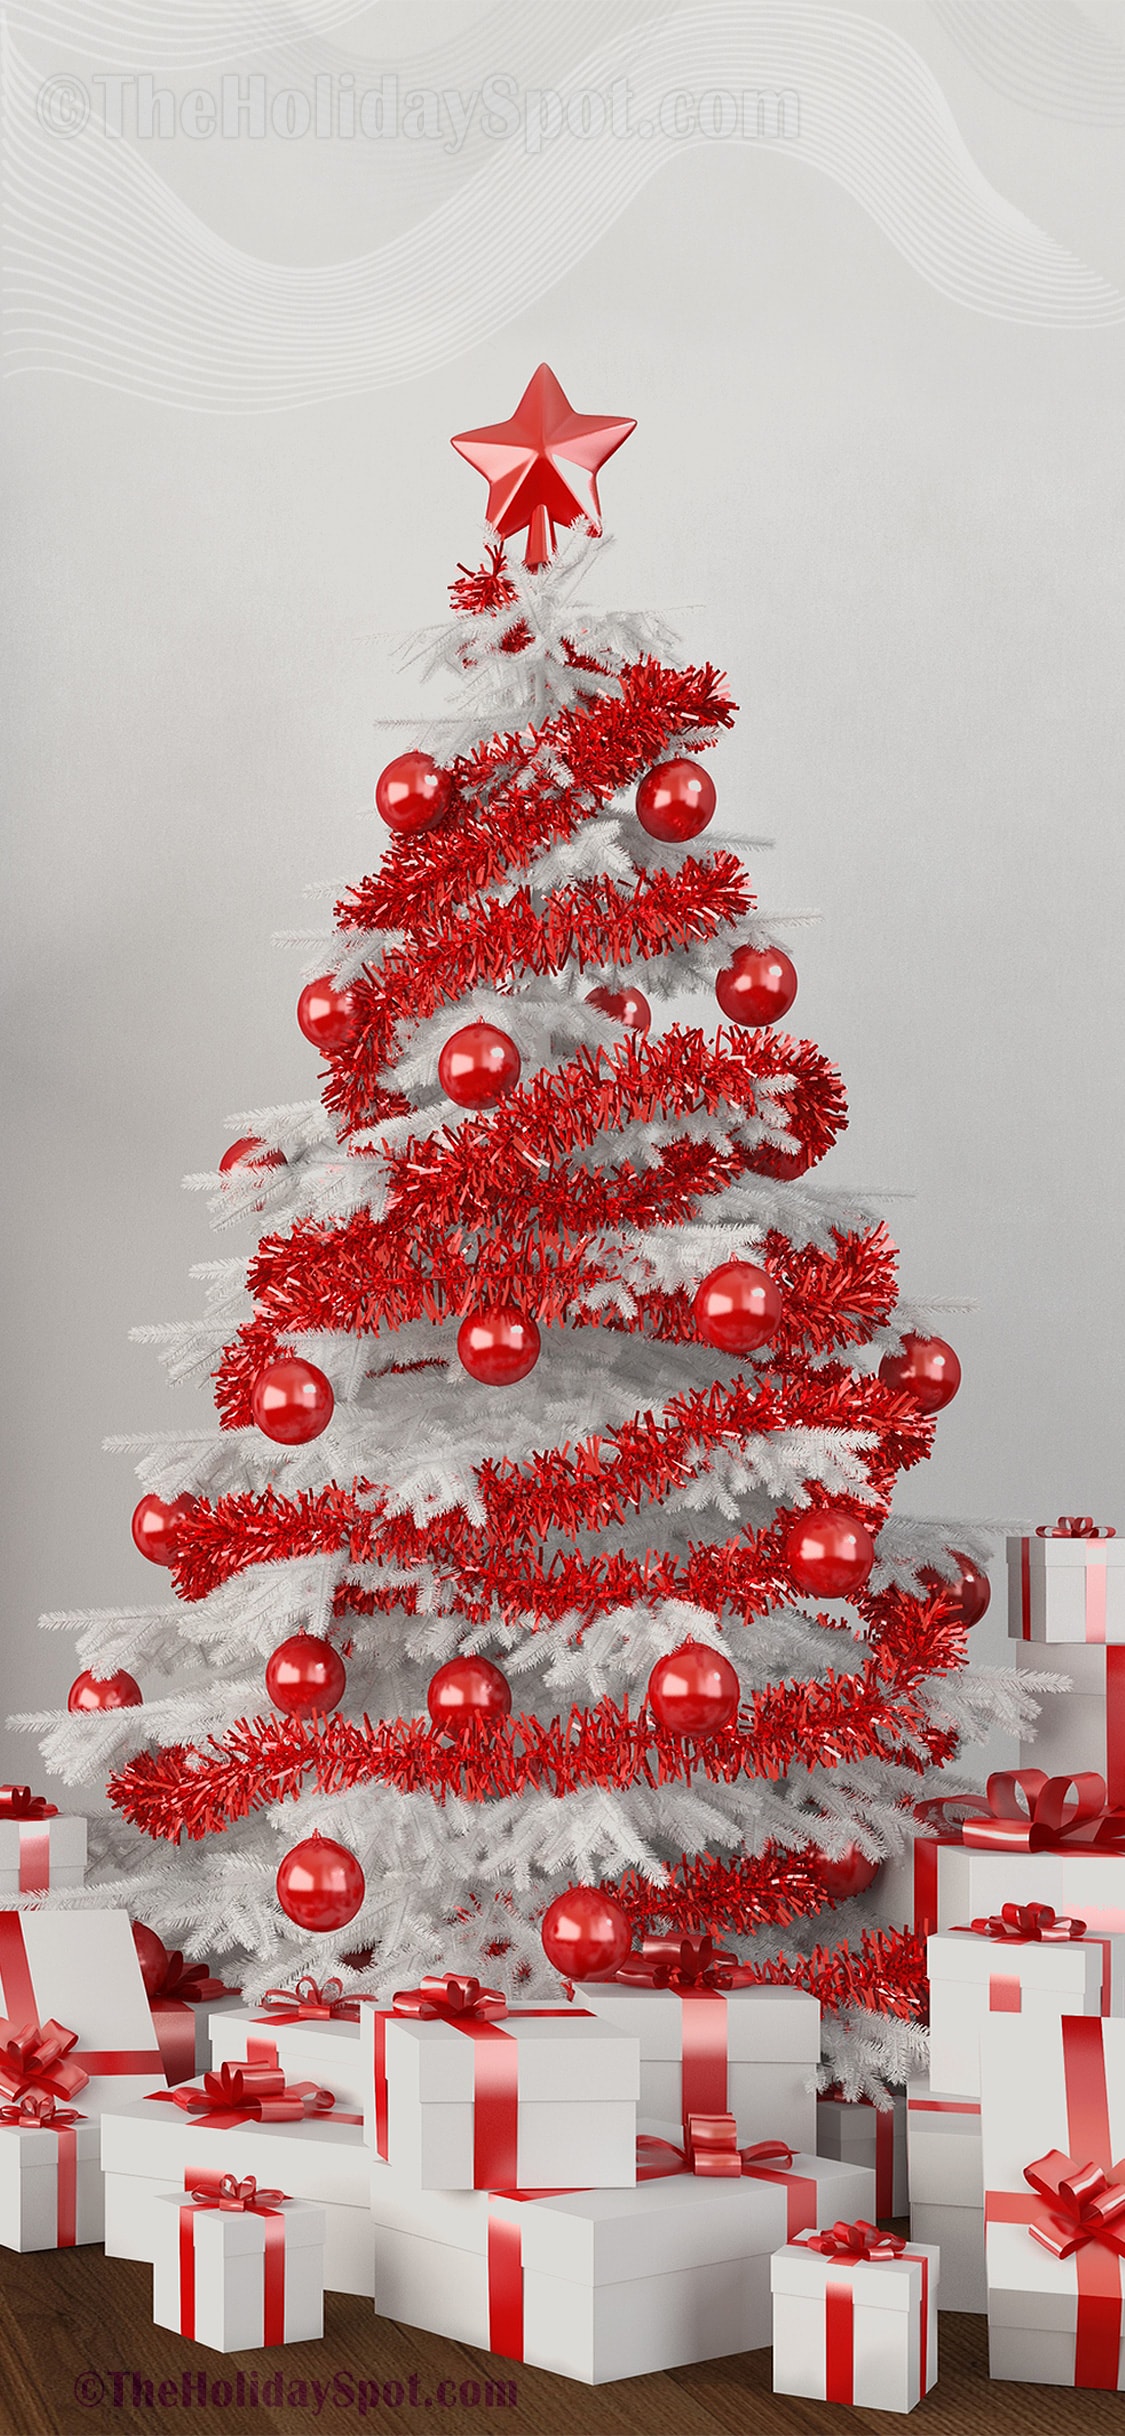 A christmas tree with presents and ornaments - Cute Christmas